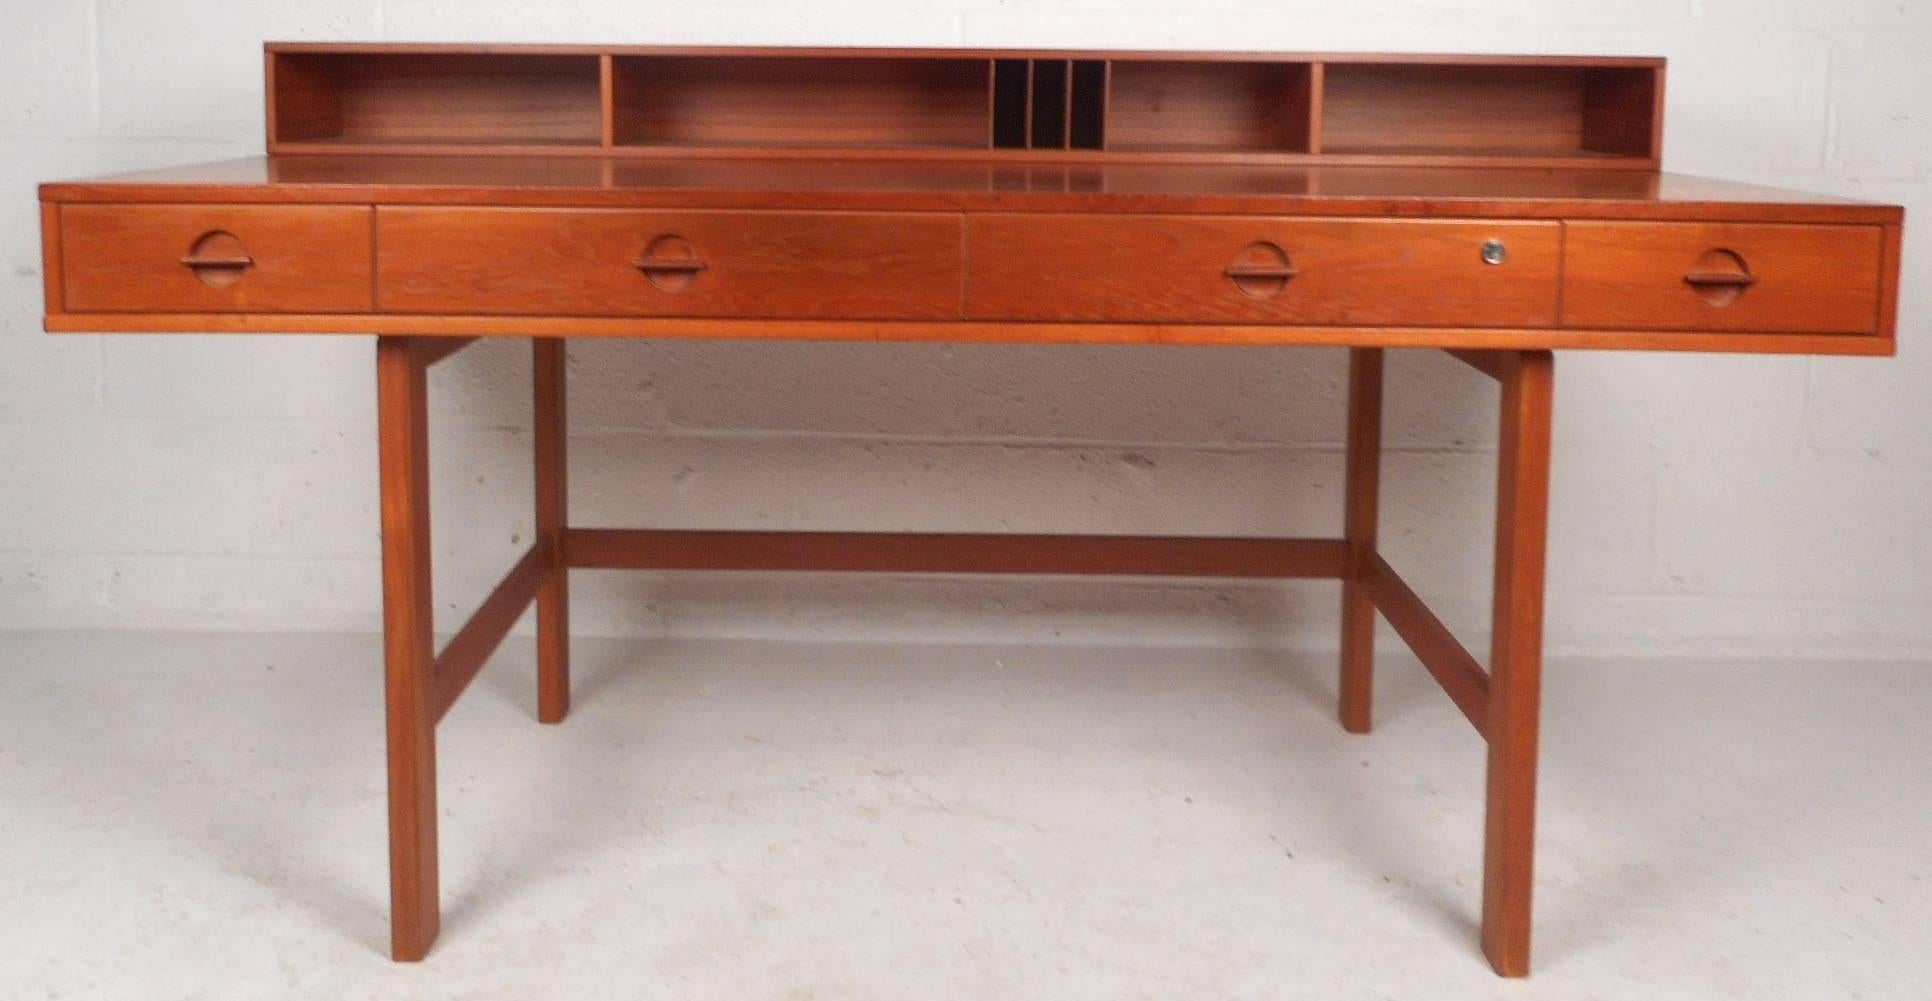 Stunning vintage modern desk features a unique top that flips down and adds plenty of work space. Sleek and functional design with four large drawers and numerous compartments on the top. Quality construction has a finished back with additional